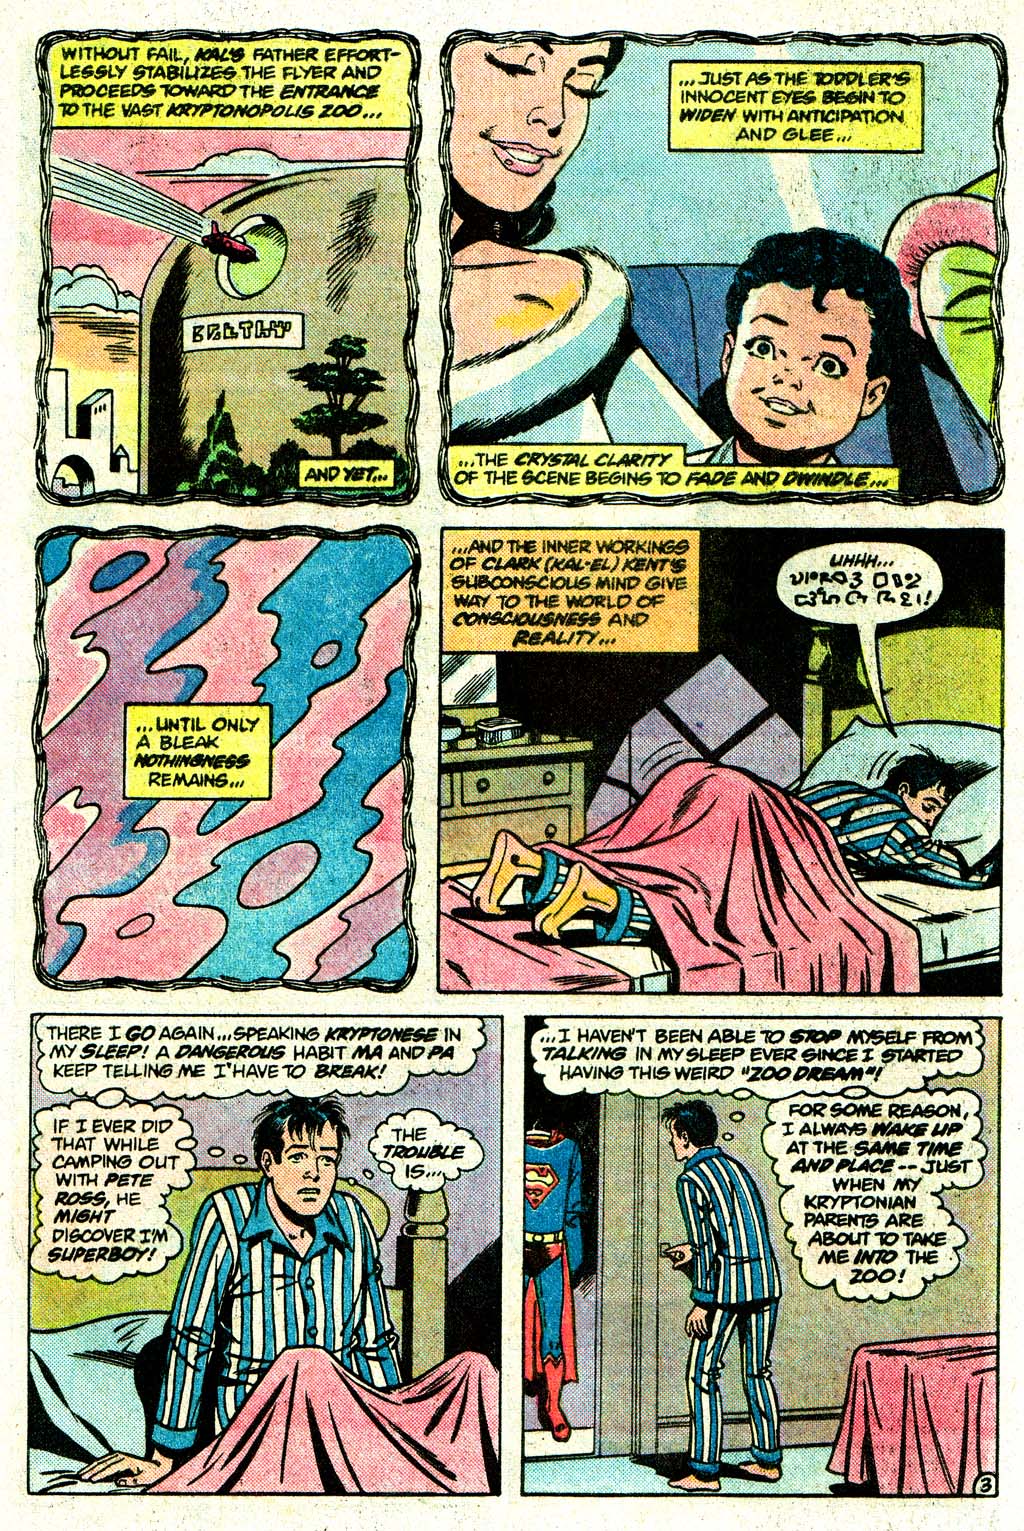 The New Adventures of Superboy 27 Page 4